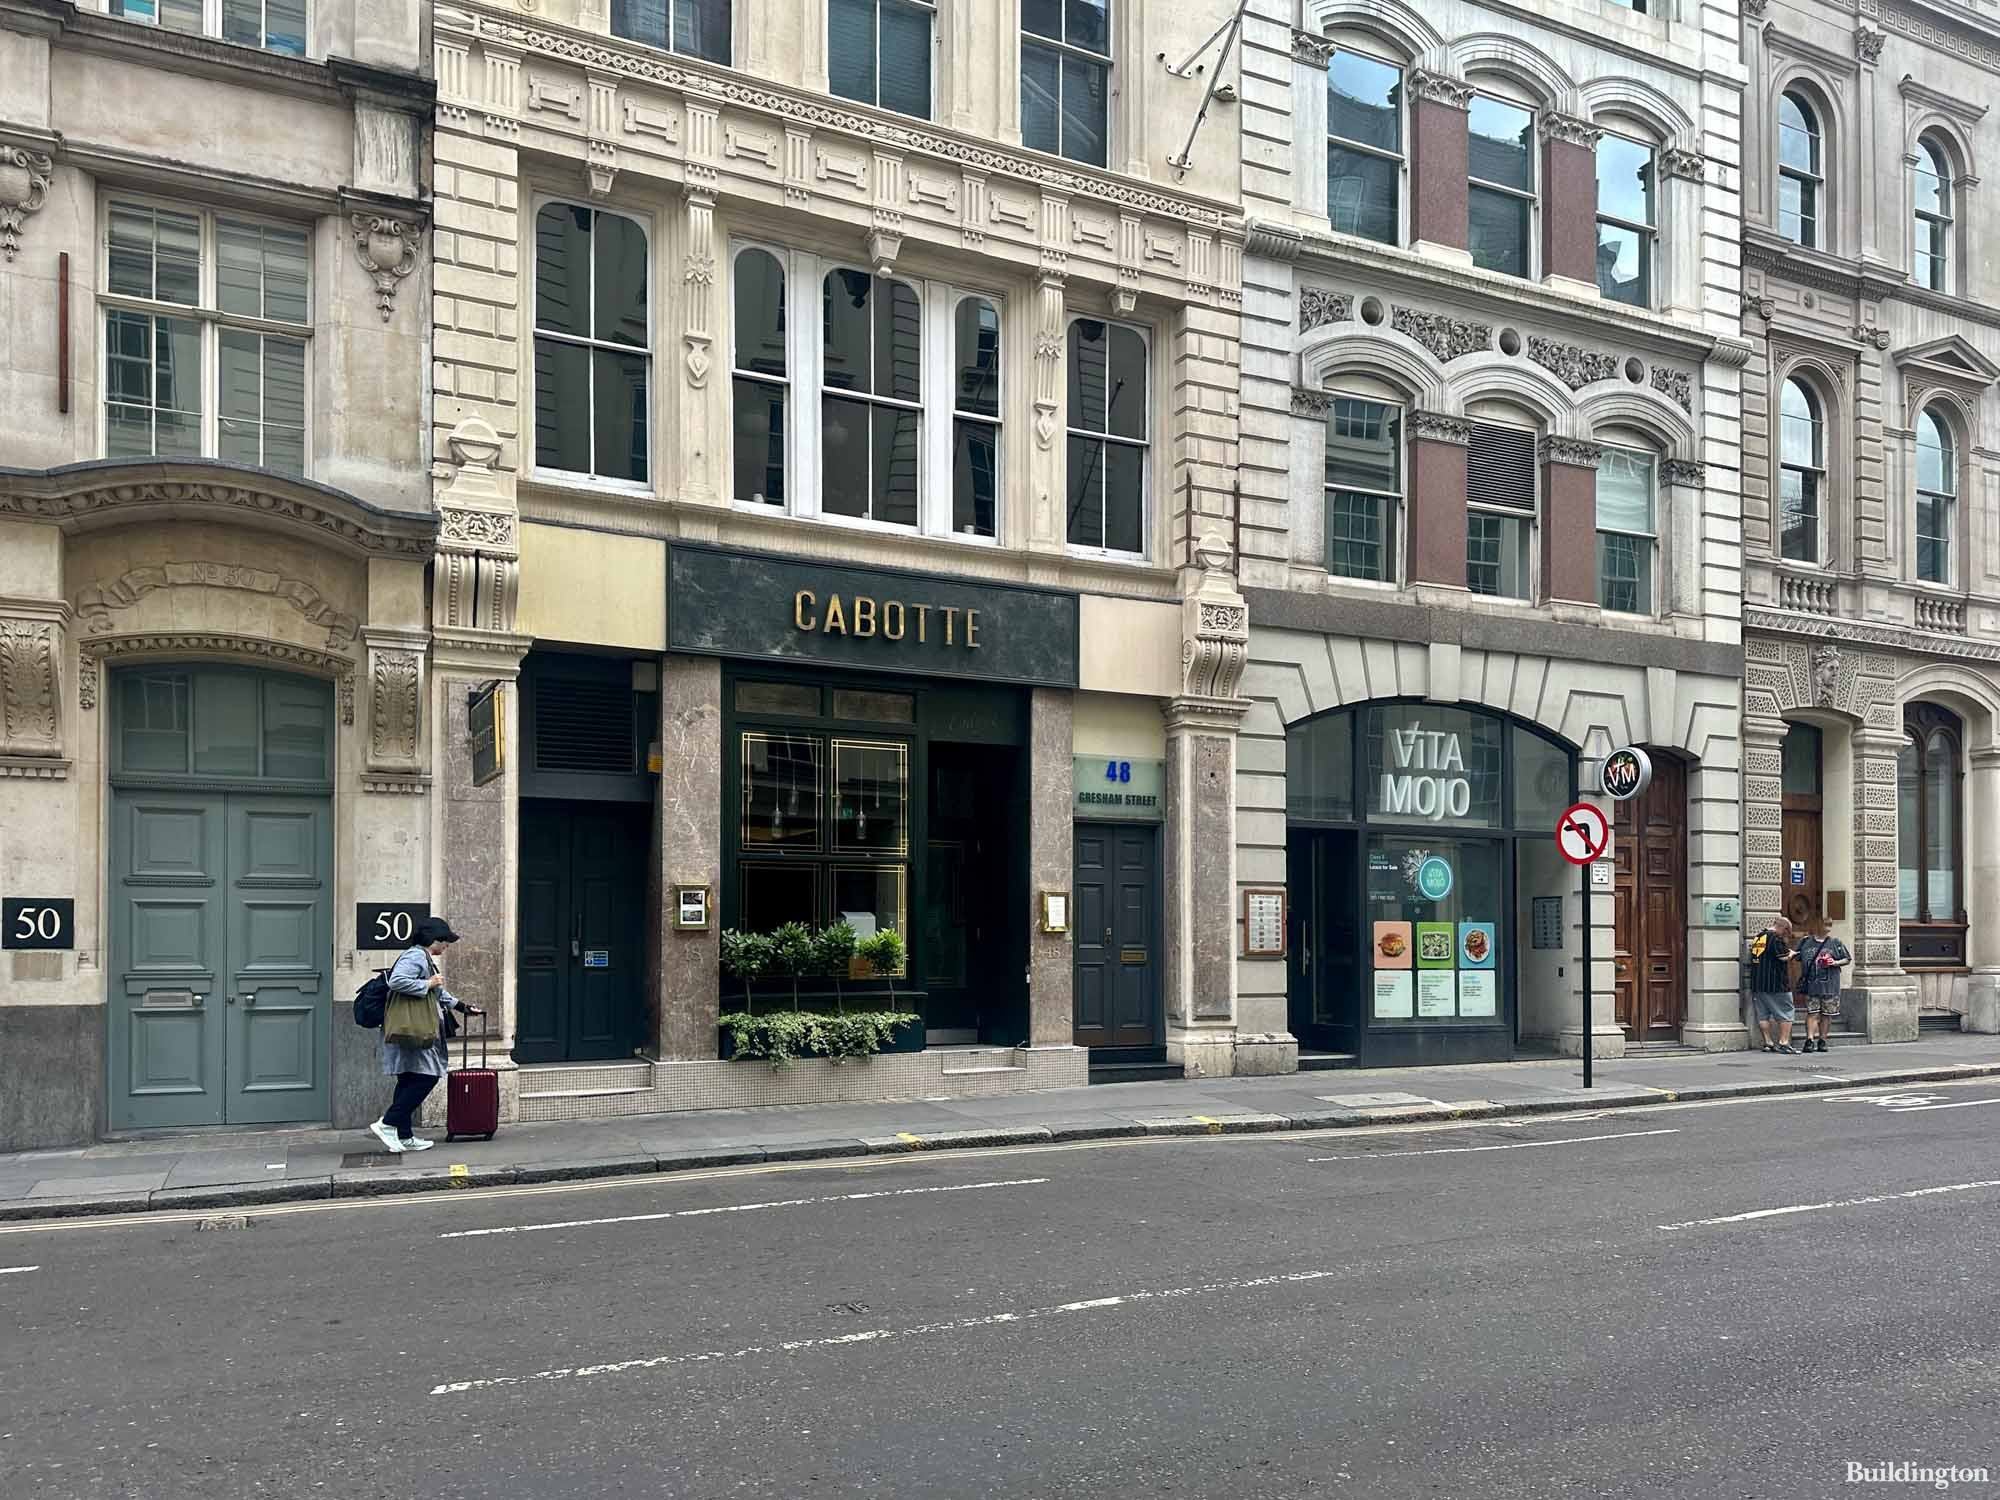 Cabotte at 48 Gresham Street building in the City of London EC2